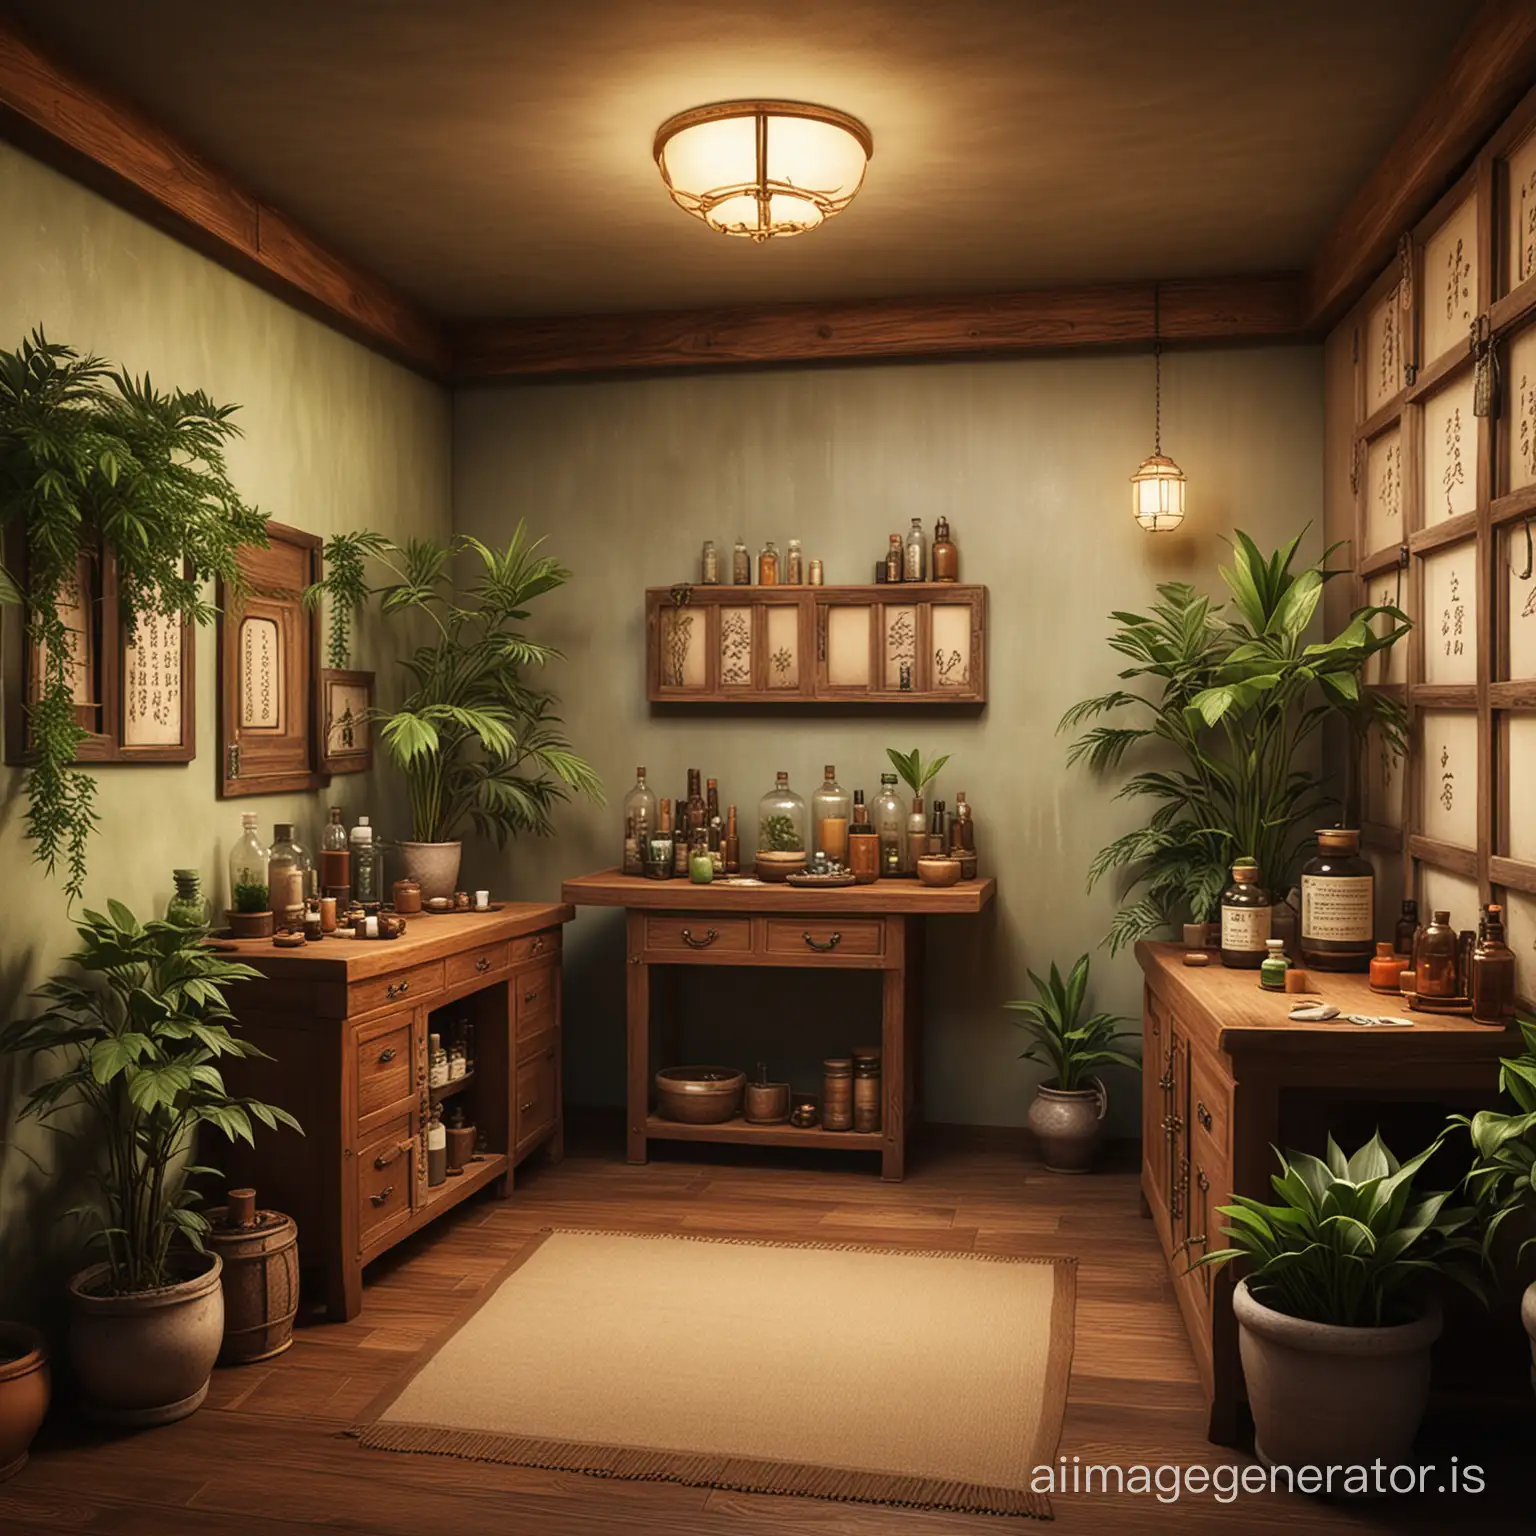 Fantasy-Medical-Treatment-Room-with-AsianInspired-Decor-and-Herbal-Accents